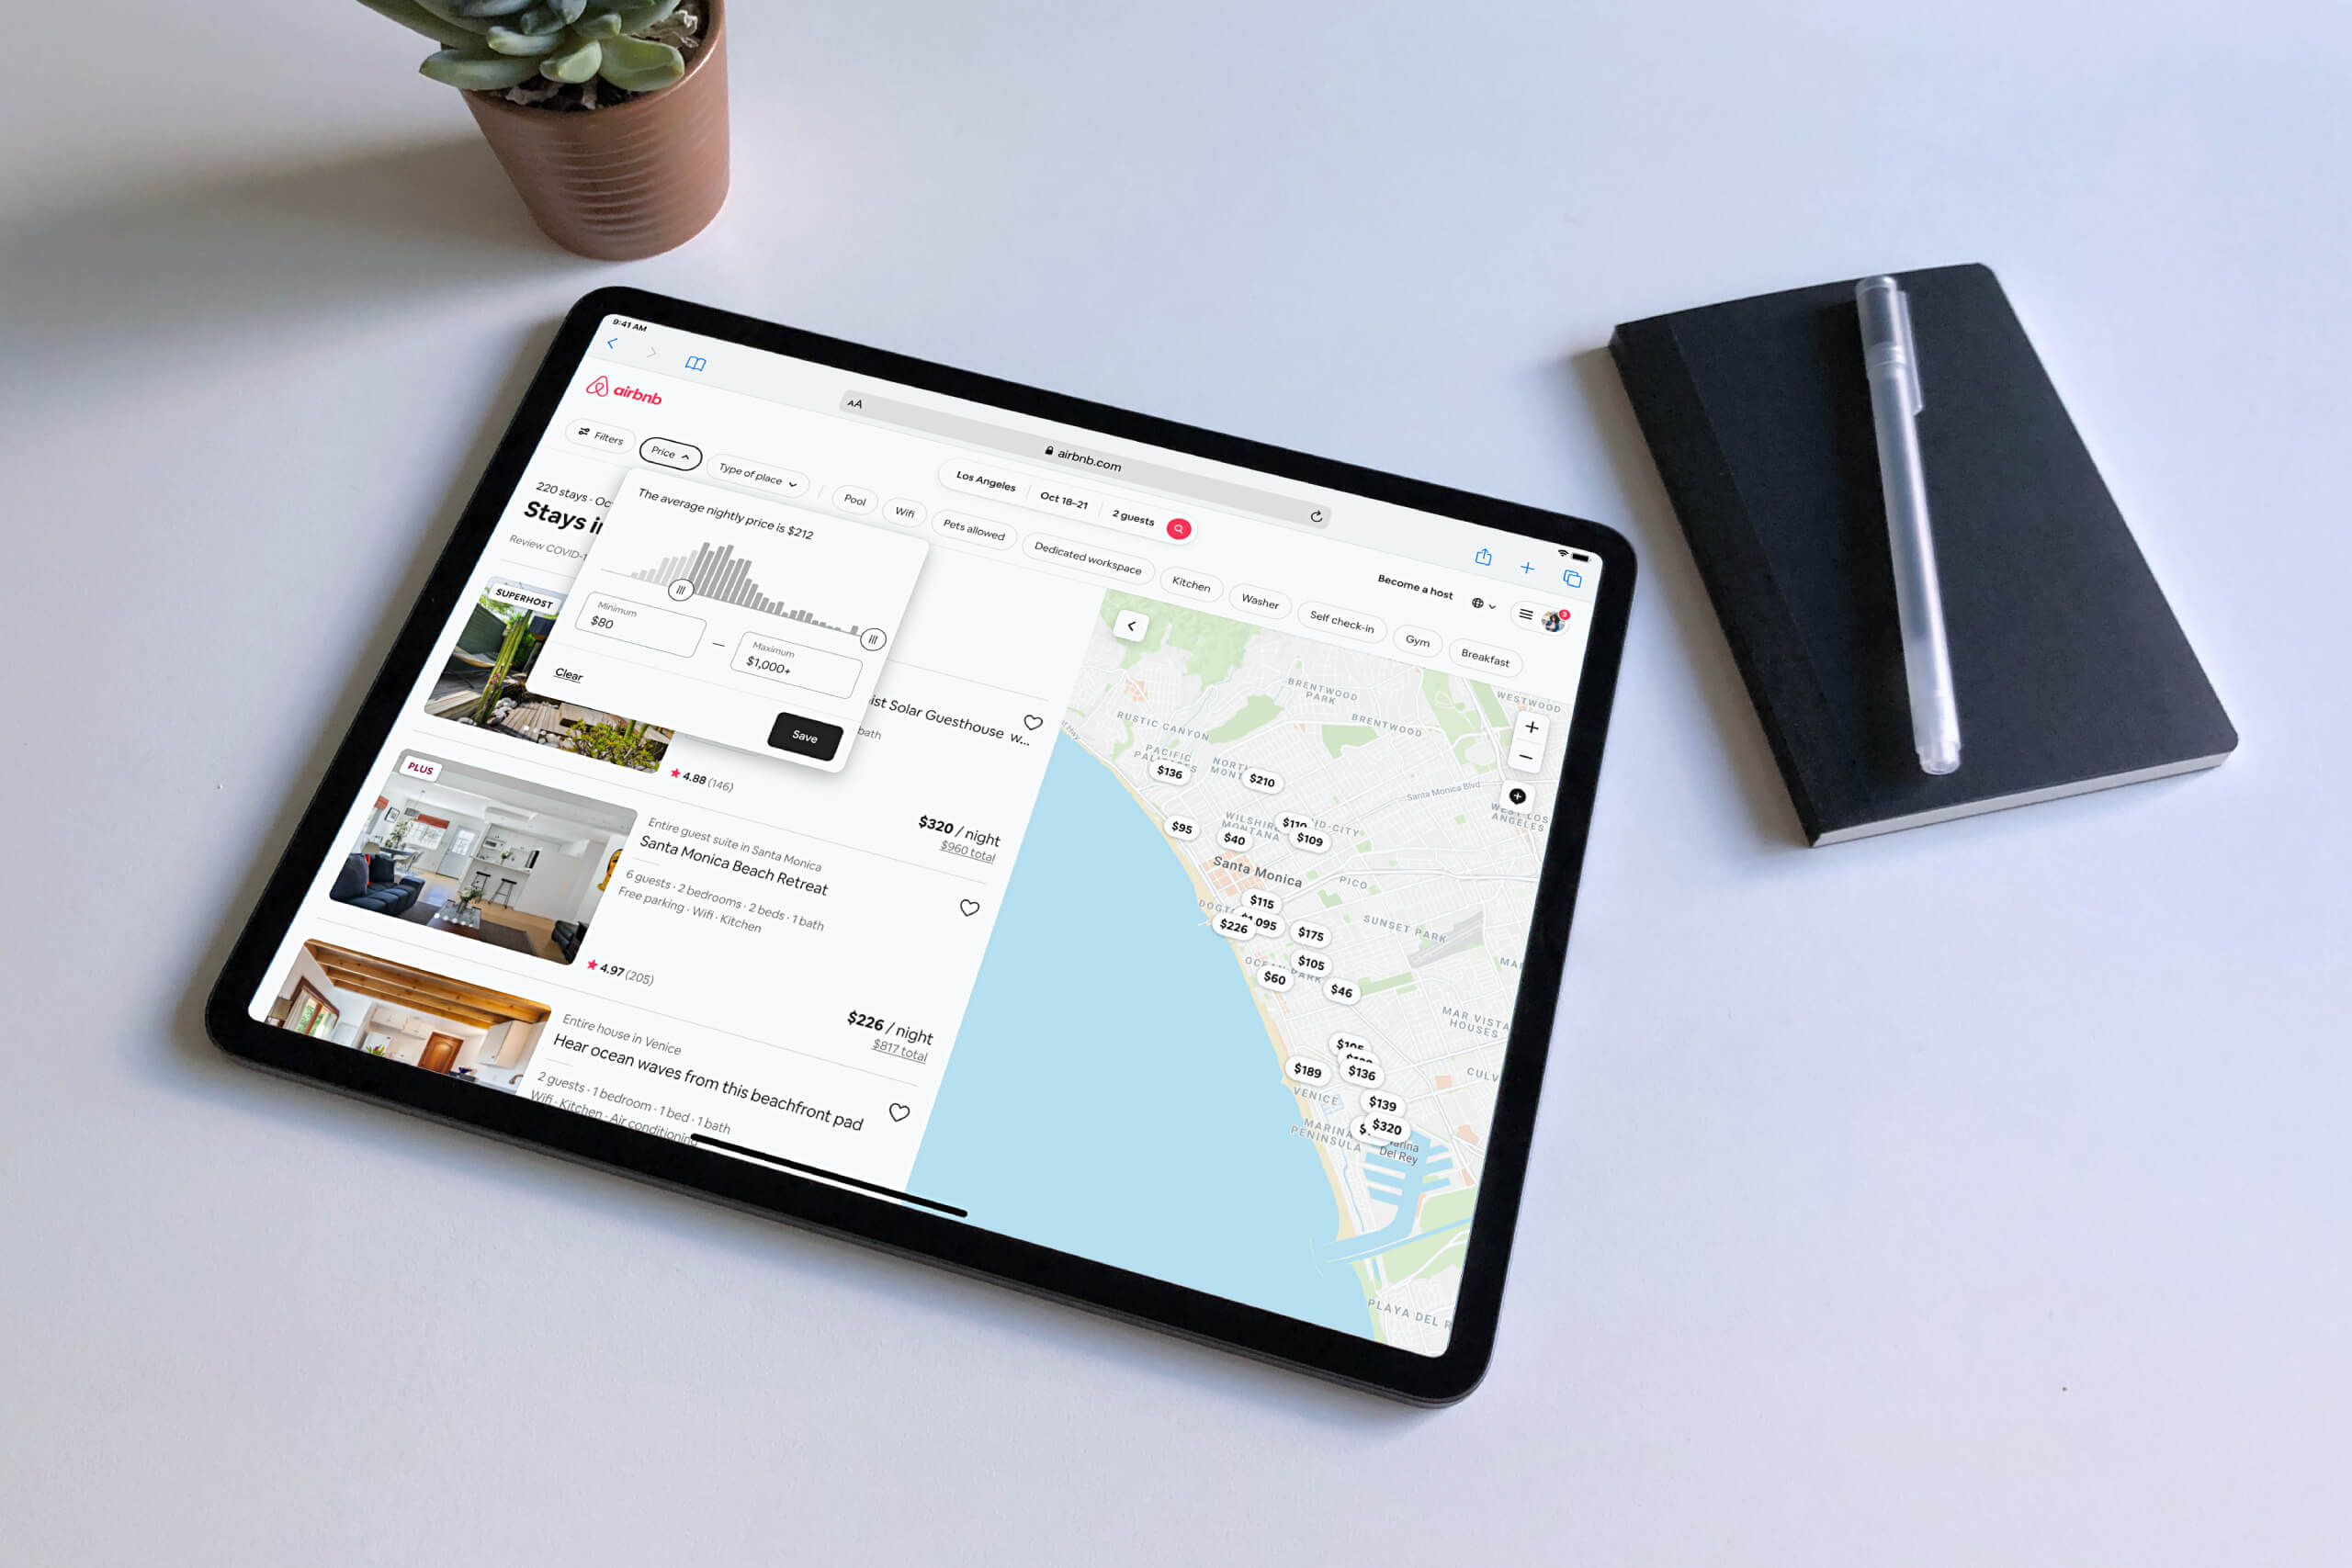 iPad Pro laying on table showing the Airbnb search results page and map view of Los Angeles